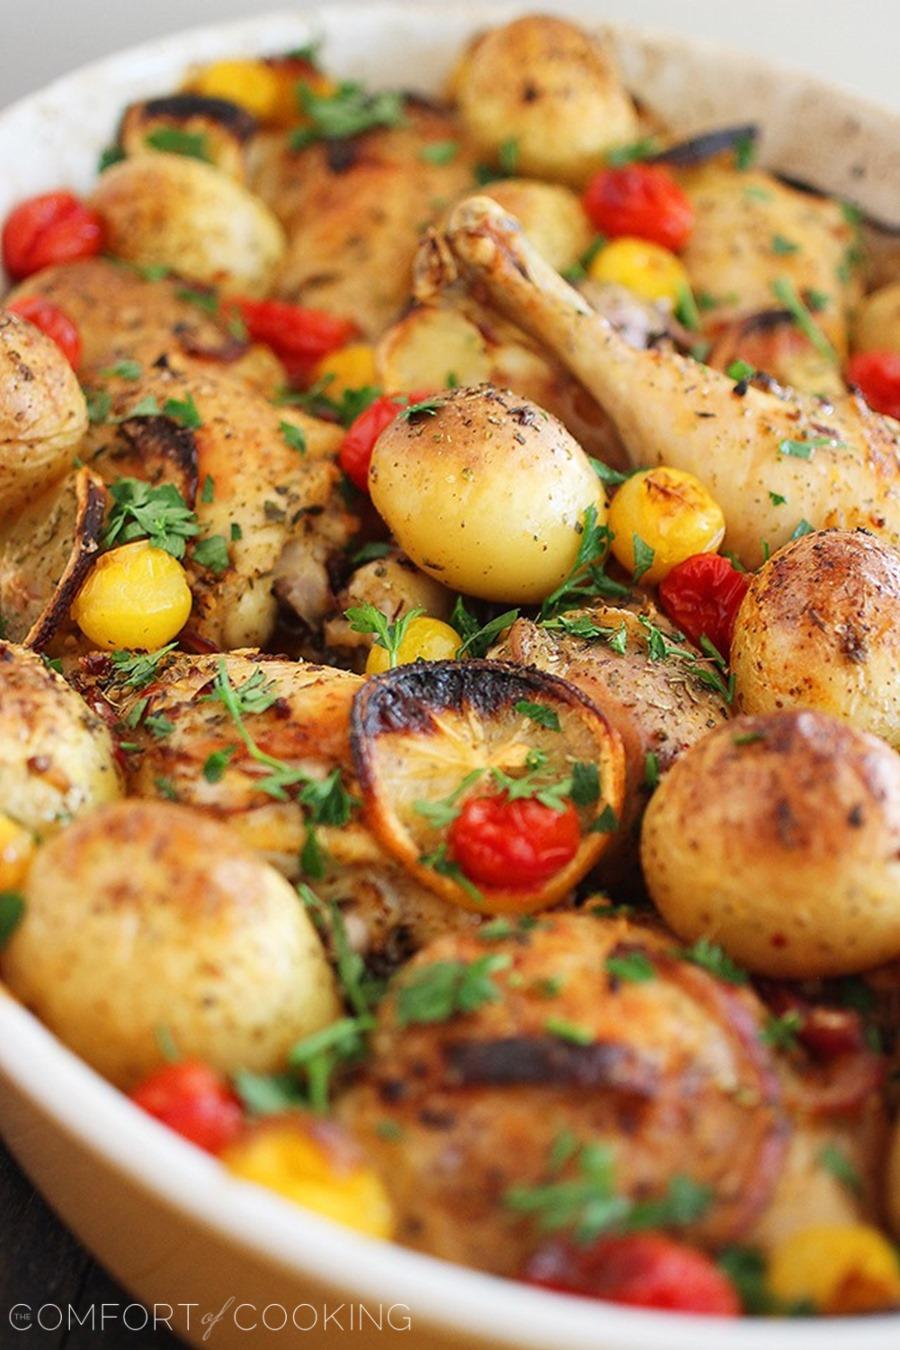 Easy Roasted Lemon Chicken with Tomatoes and Potatoes – Comfort food at its best. Add this hearty, healthy one-pan meal to your weeknight menu! | thecomfortofcooking.com